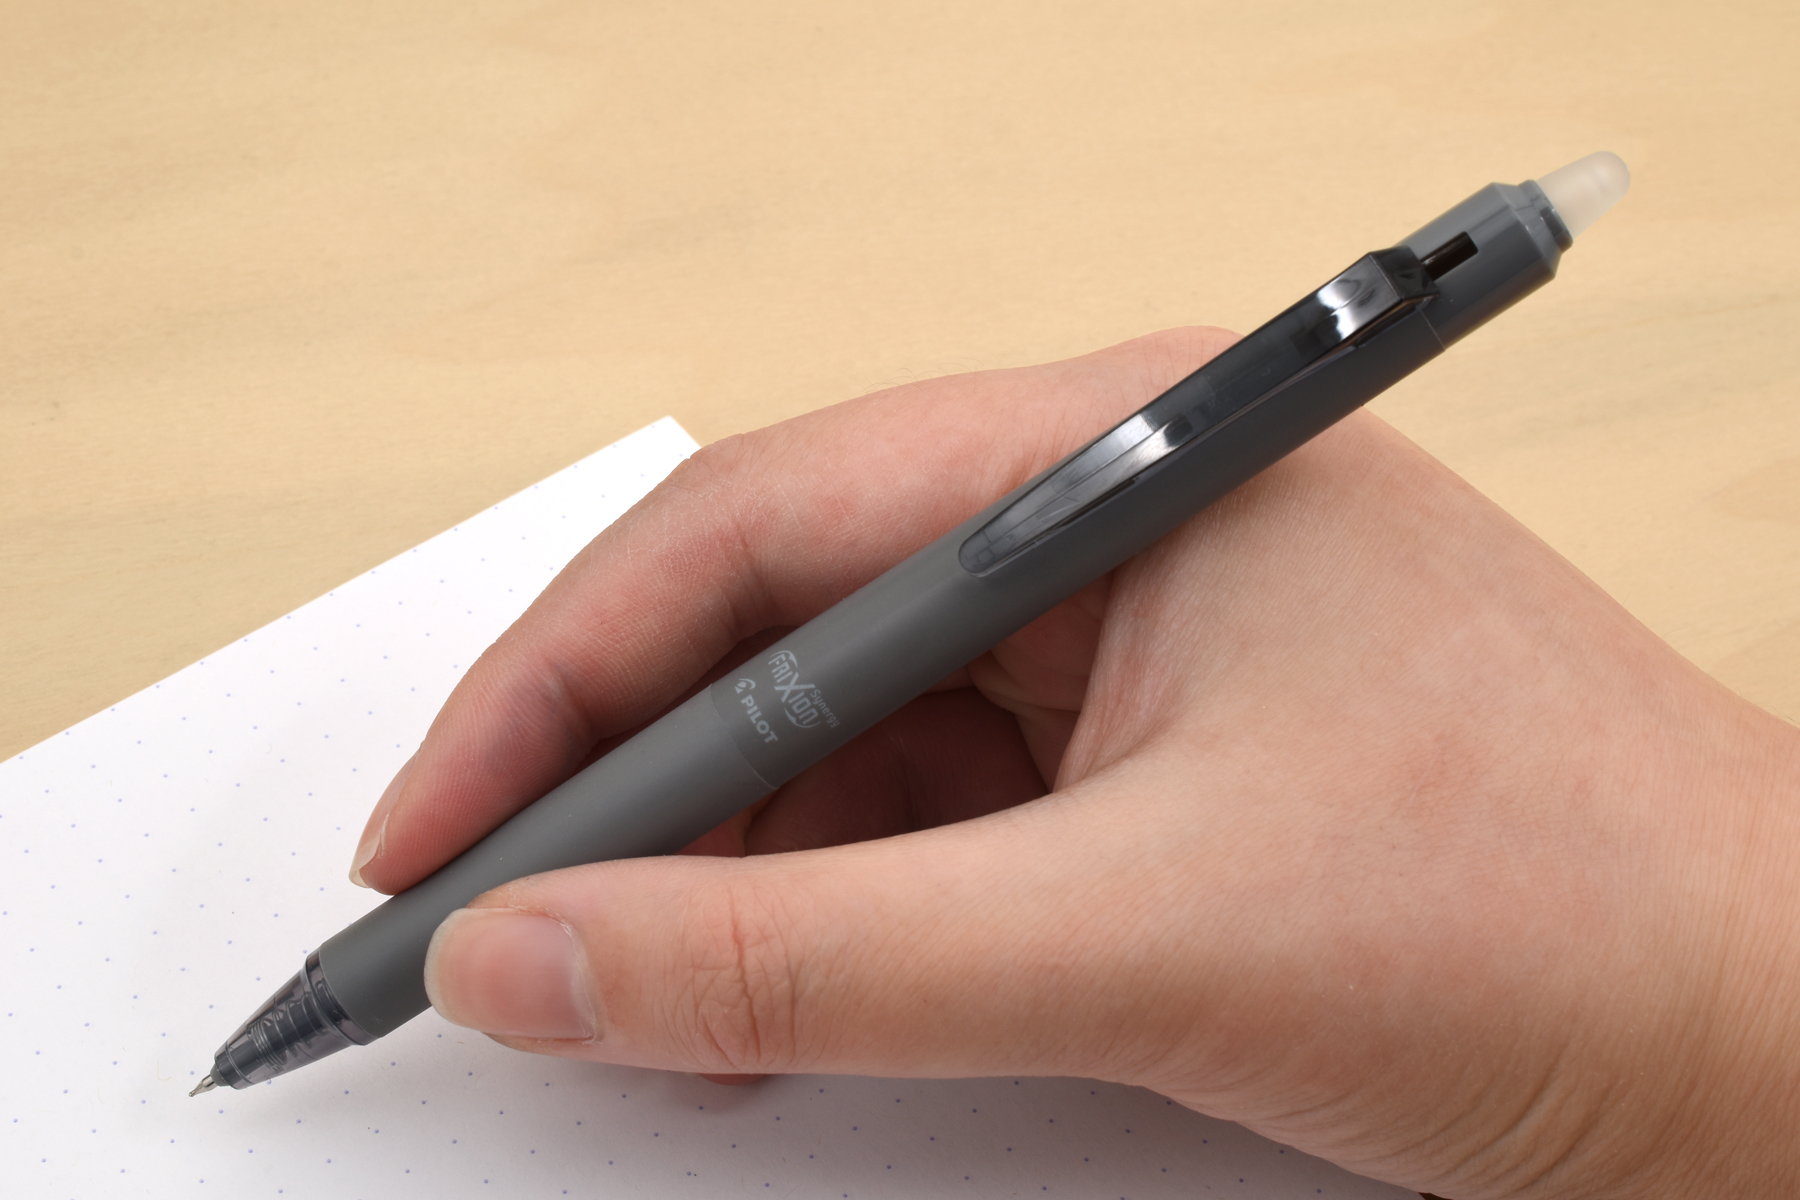 The FriXion Synergy Knock is another gel pen with Pilot’s Synergy tip design.